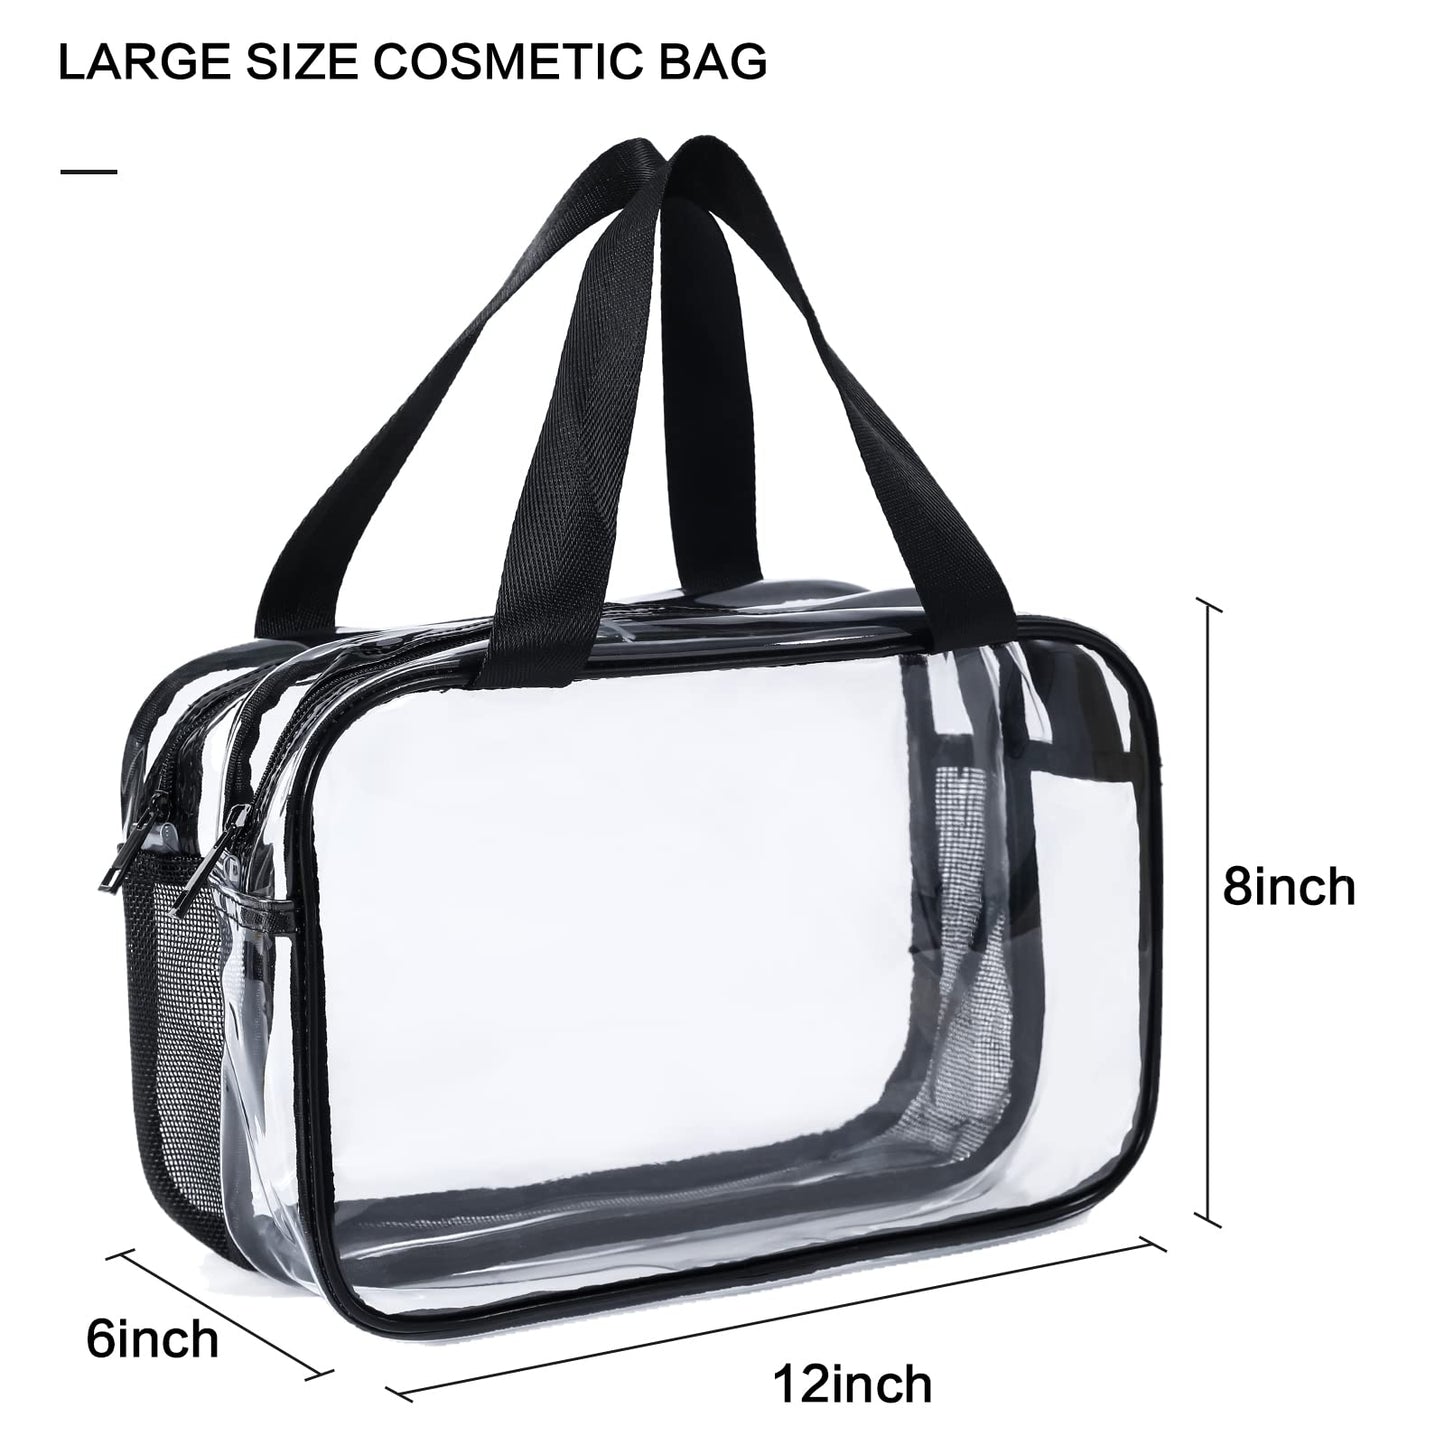 Auseibeely Clear Cosmetics Bag Toiletry Bag, Large Clear Travel Bag for Toiletries, Waterproof & Draining Transparent Makeup Bag Tote Bag, Carry On Airport Airline Compliant Bag for Men Women